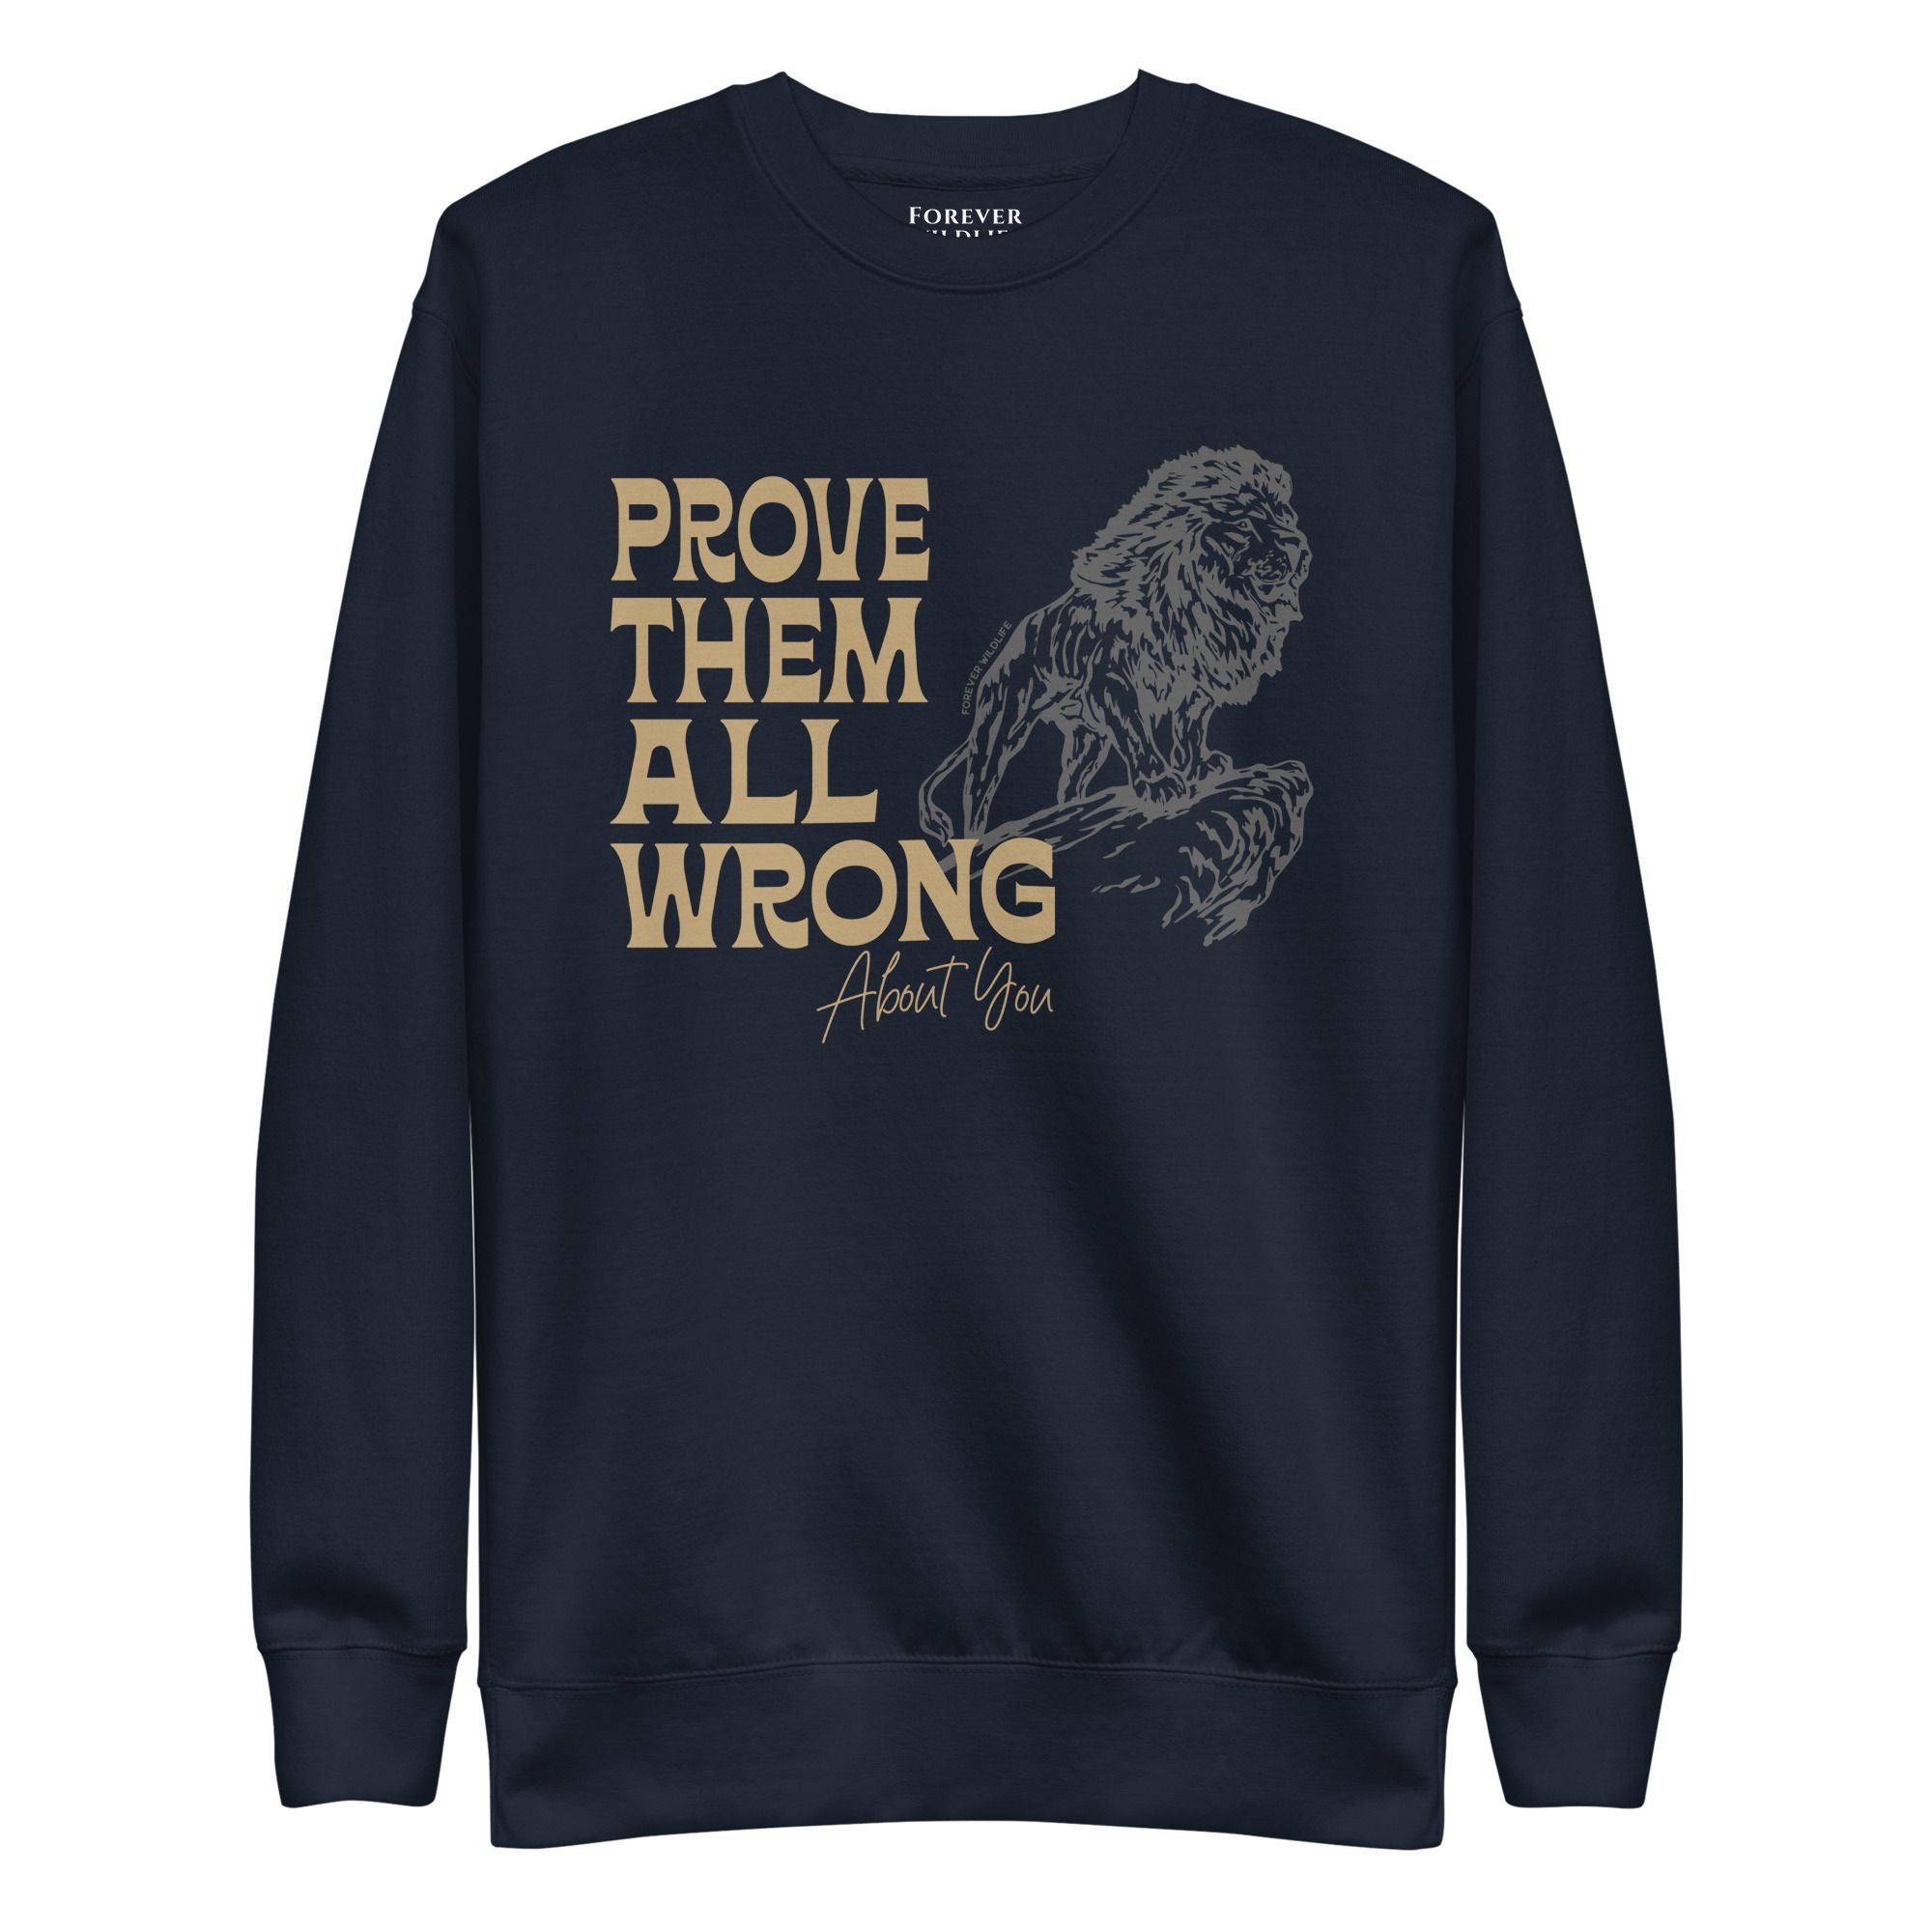 Lion Sweatshirt in Navy-Premium Wildlife Animal Inspiration Sweatshirt Design with 'Prove Them All Wrong About You' text, part of Wildlife Sweatshirts & Clothing from Forever Wildlife.